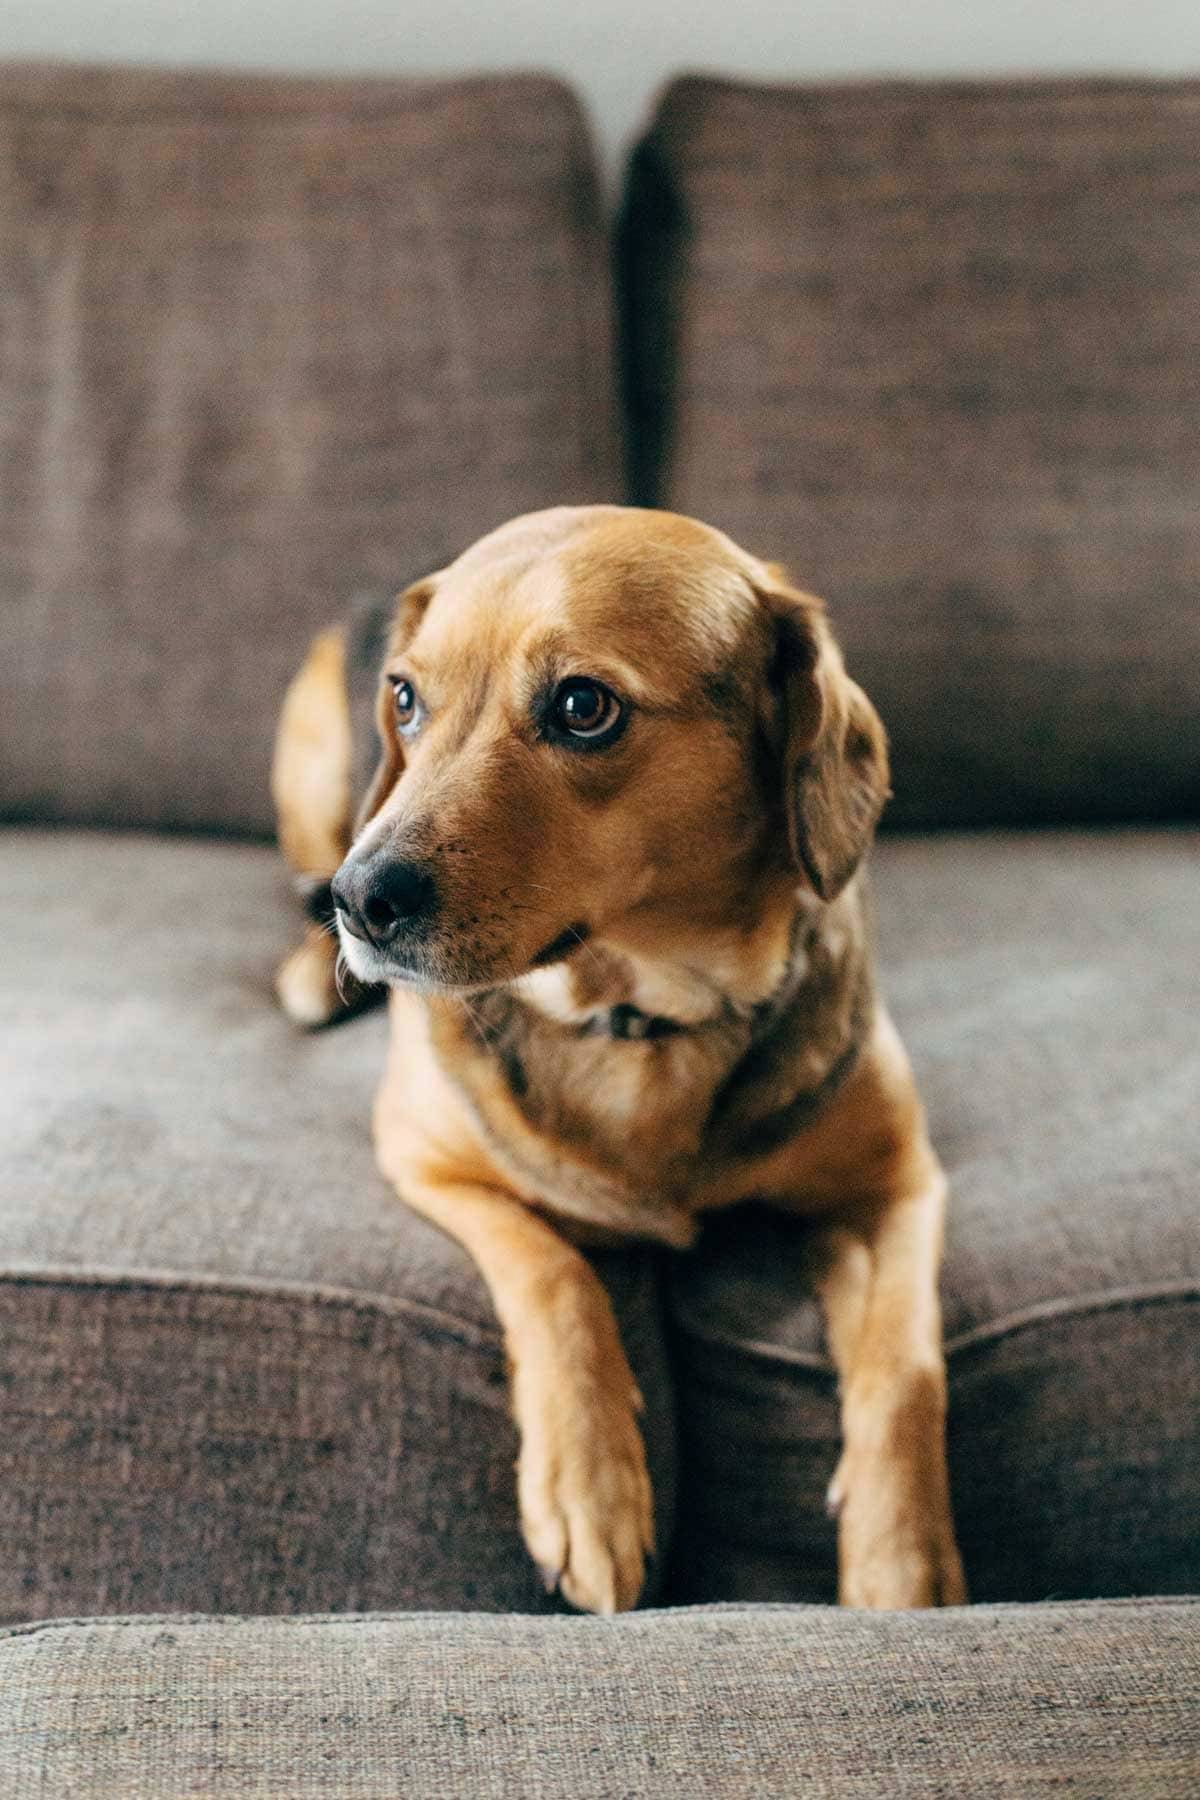 Dog on a couch.